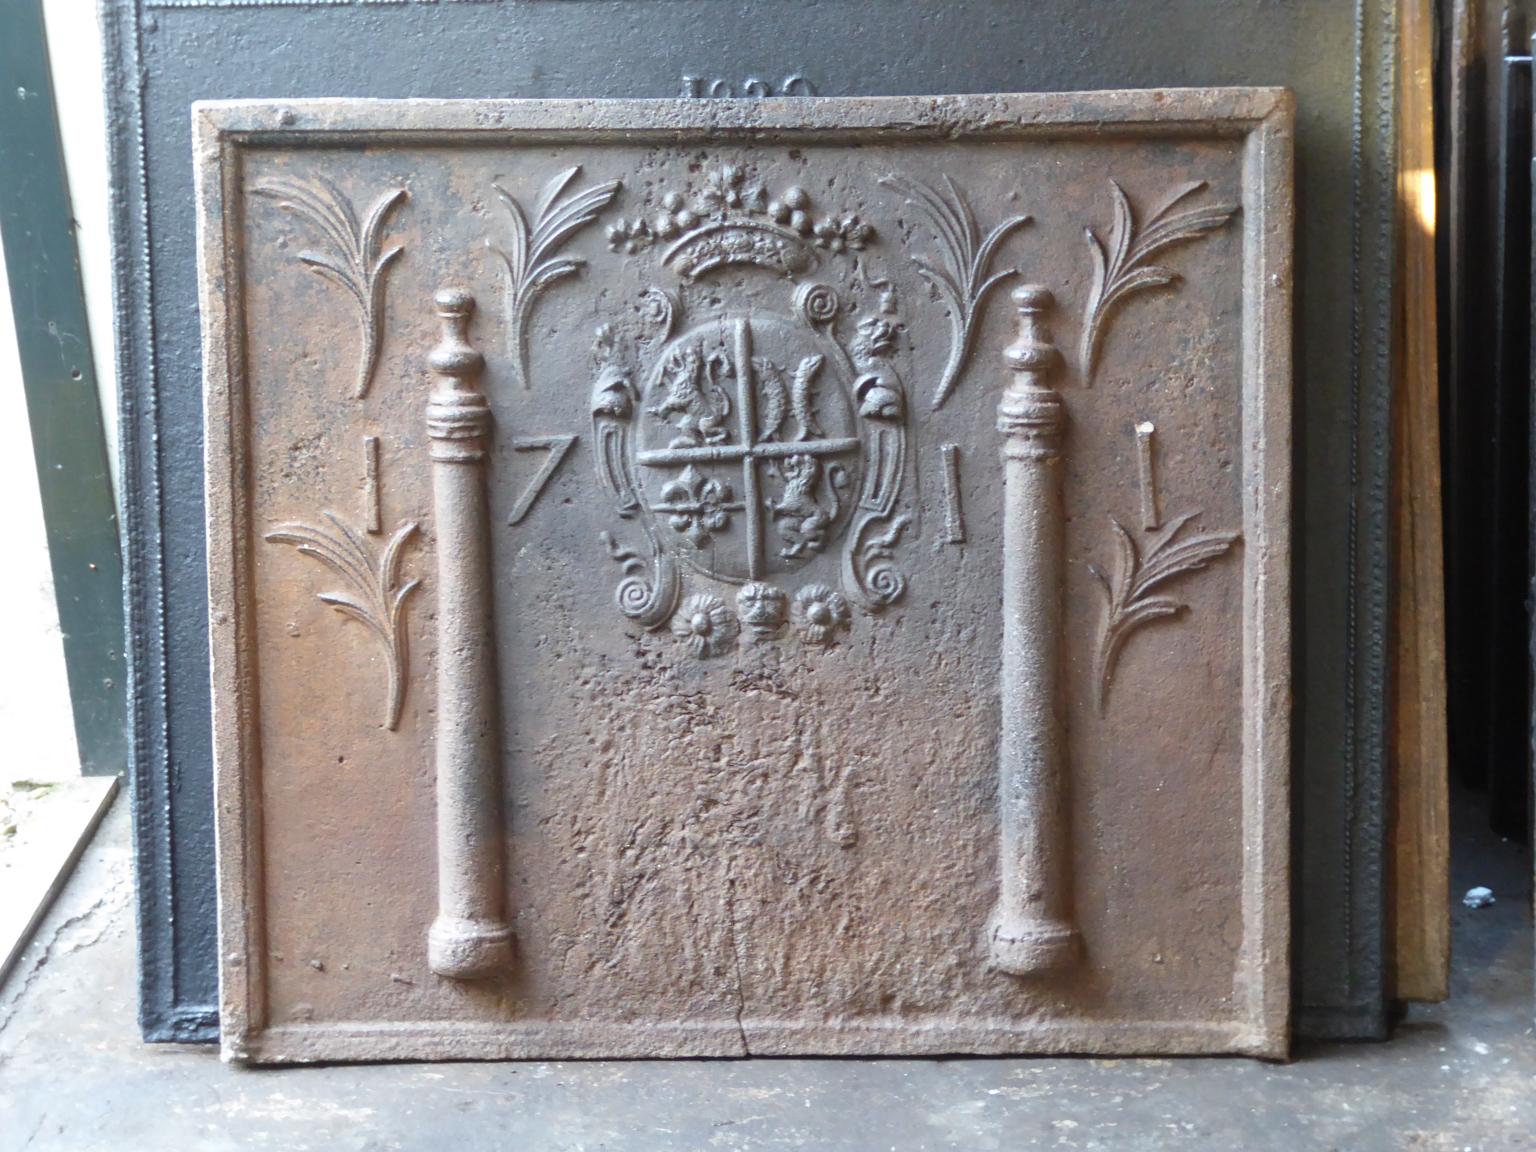 Beautiful 18th century French Louis XIV fireback with a coat of arms. The coat of arms is flanked by two Pillars of Hercules, which symbolize strength and the unknown. The date of production of the fireback, 1711, is also cast in the fireback. 

The